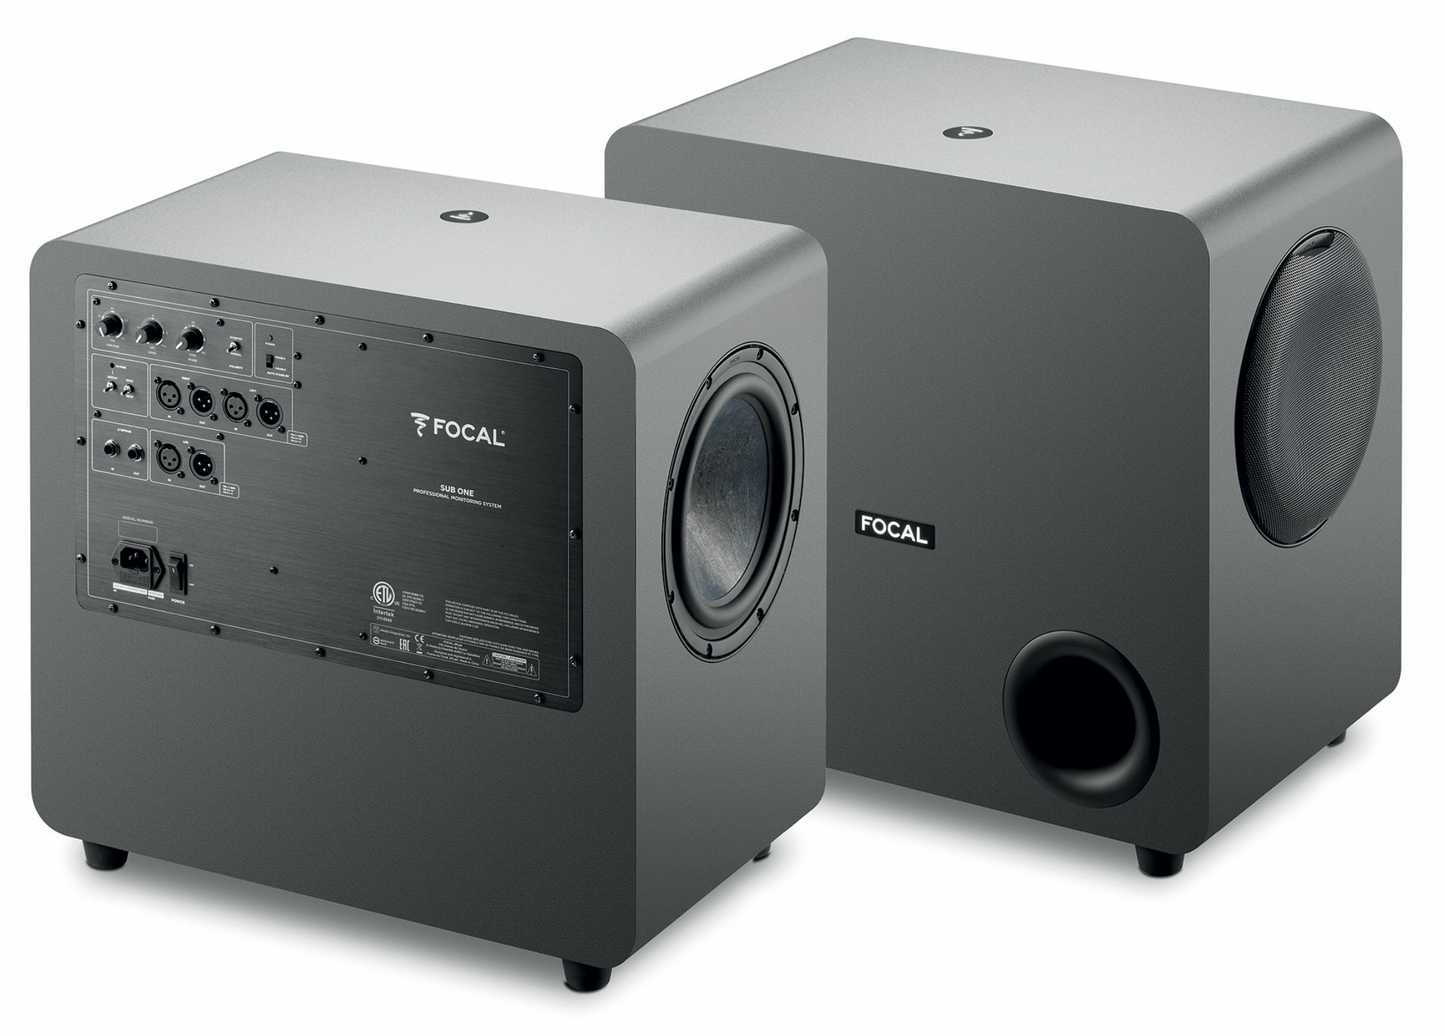 Focal Sub One Active Studio Subwoofer, image shows two side by side